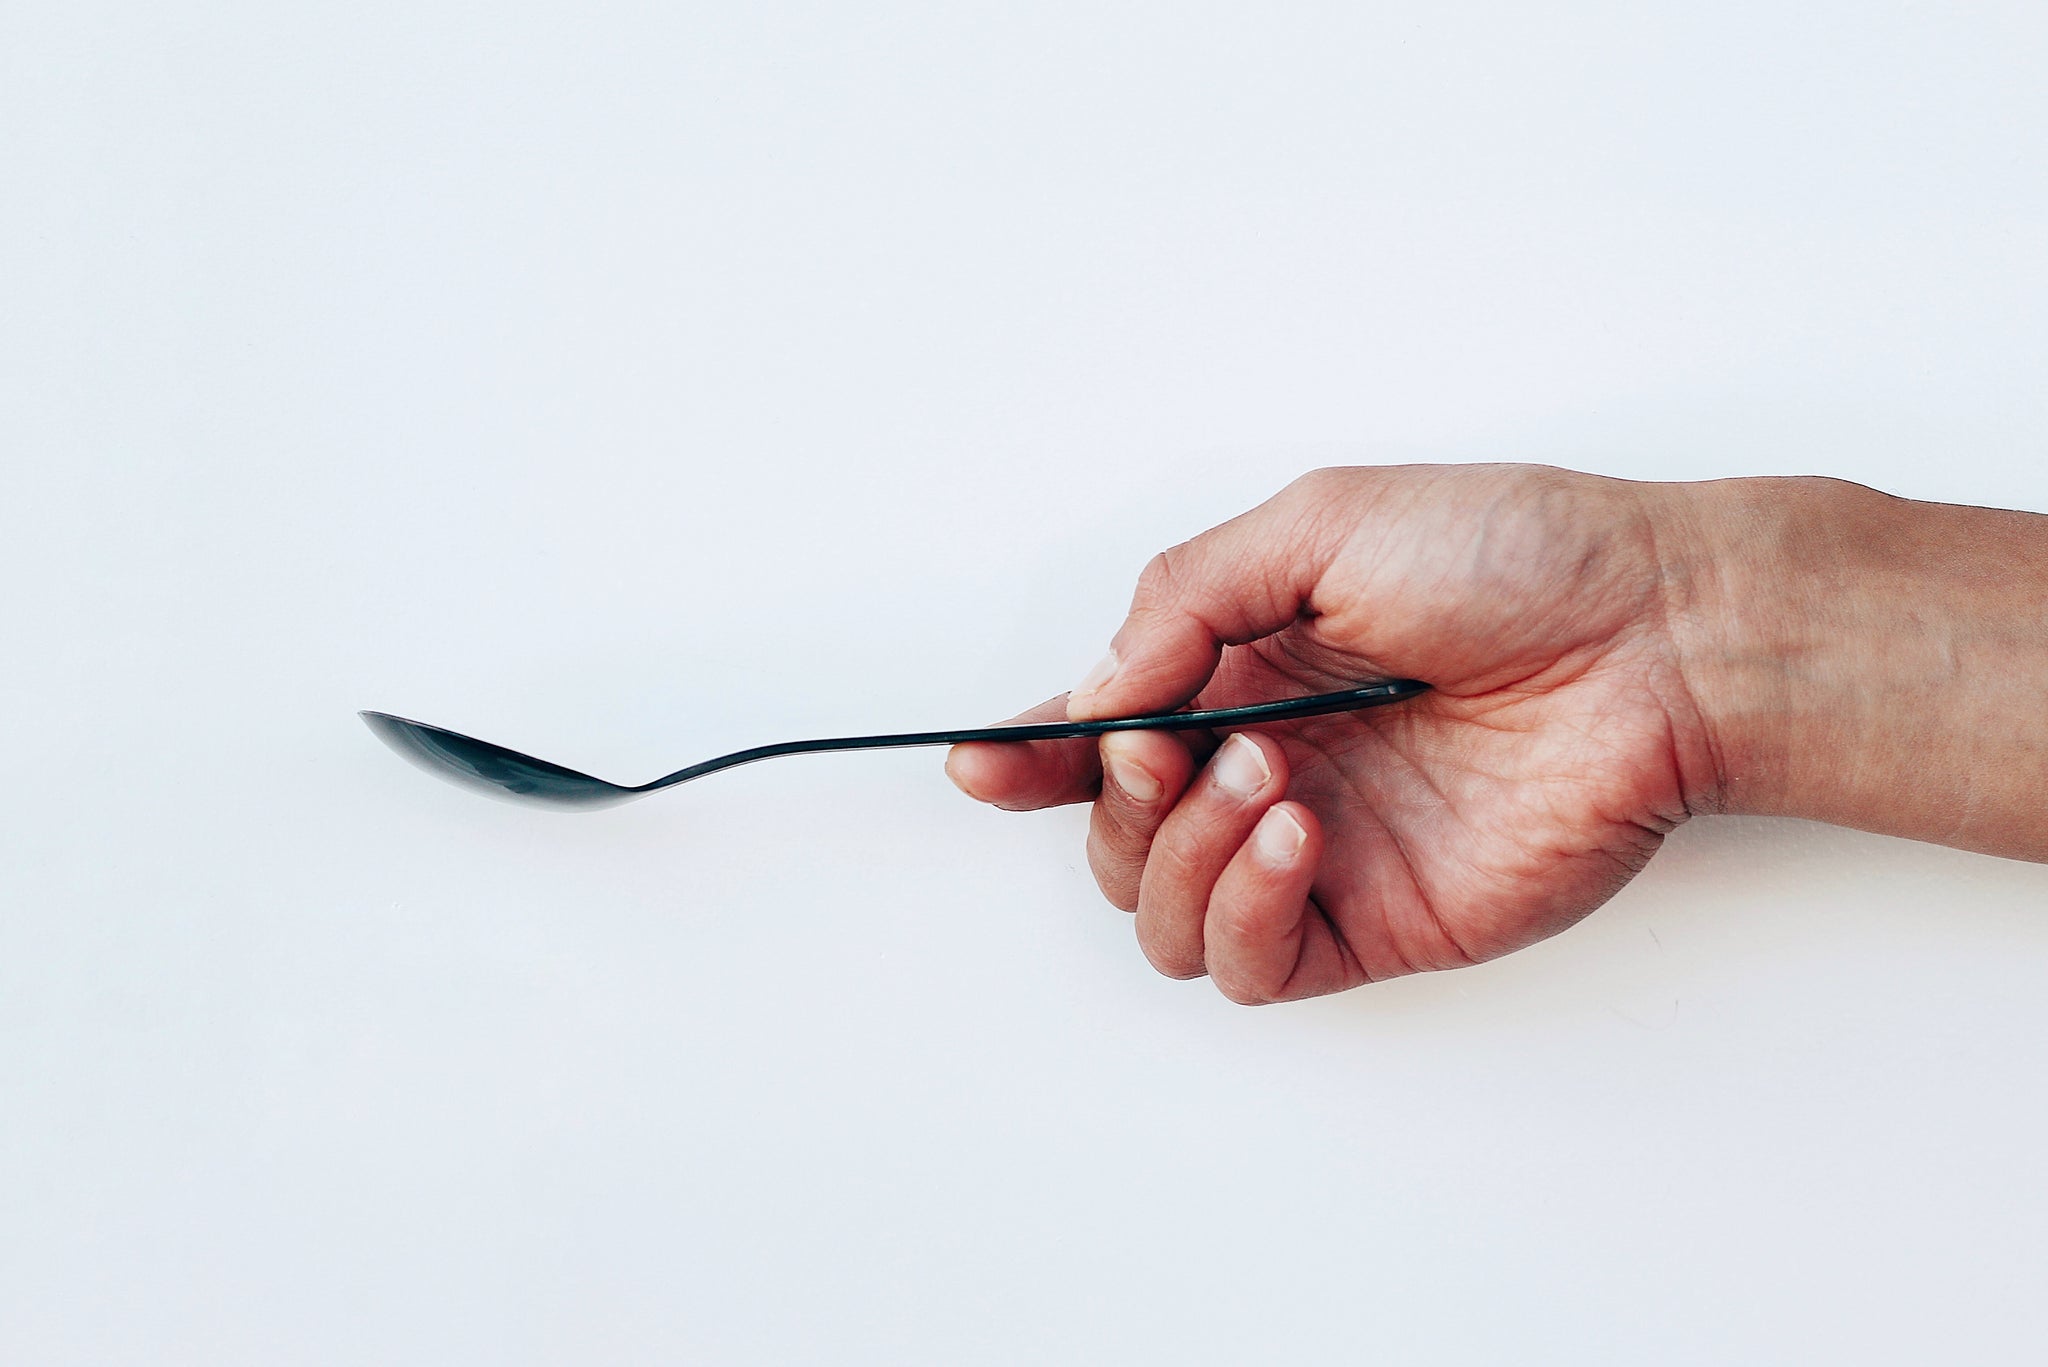 The Big Dipper: Goth Black  Umeshiso Cupping Spoon by Bean & Bean